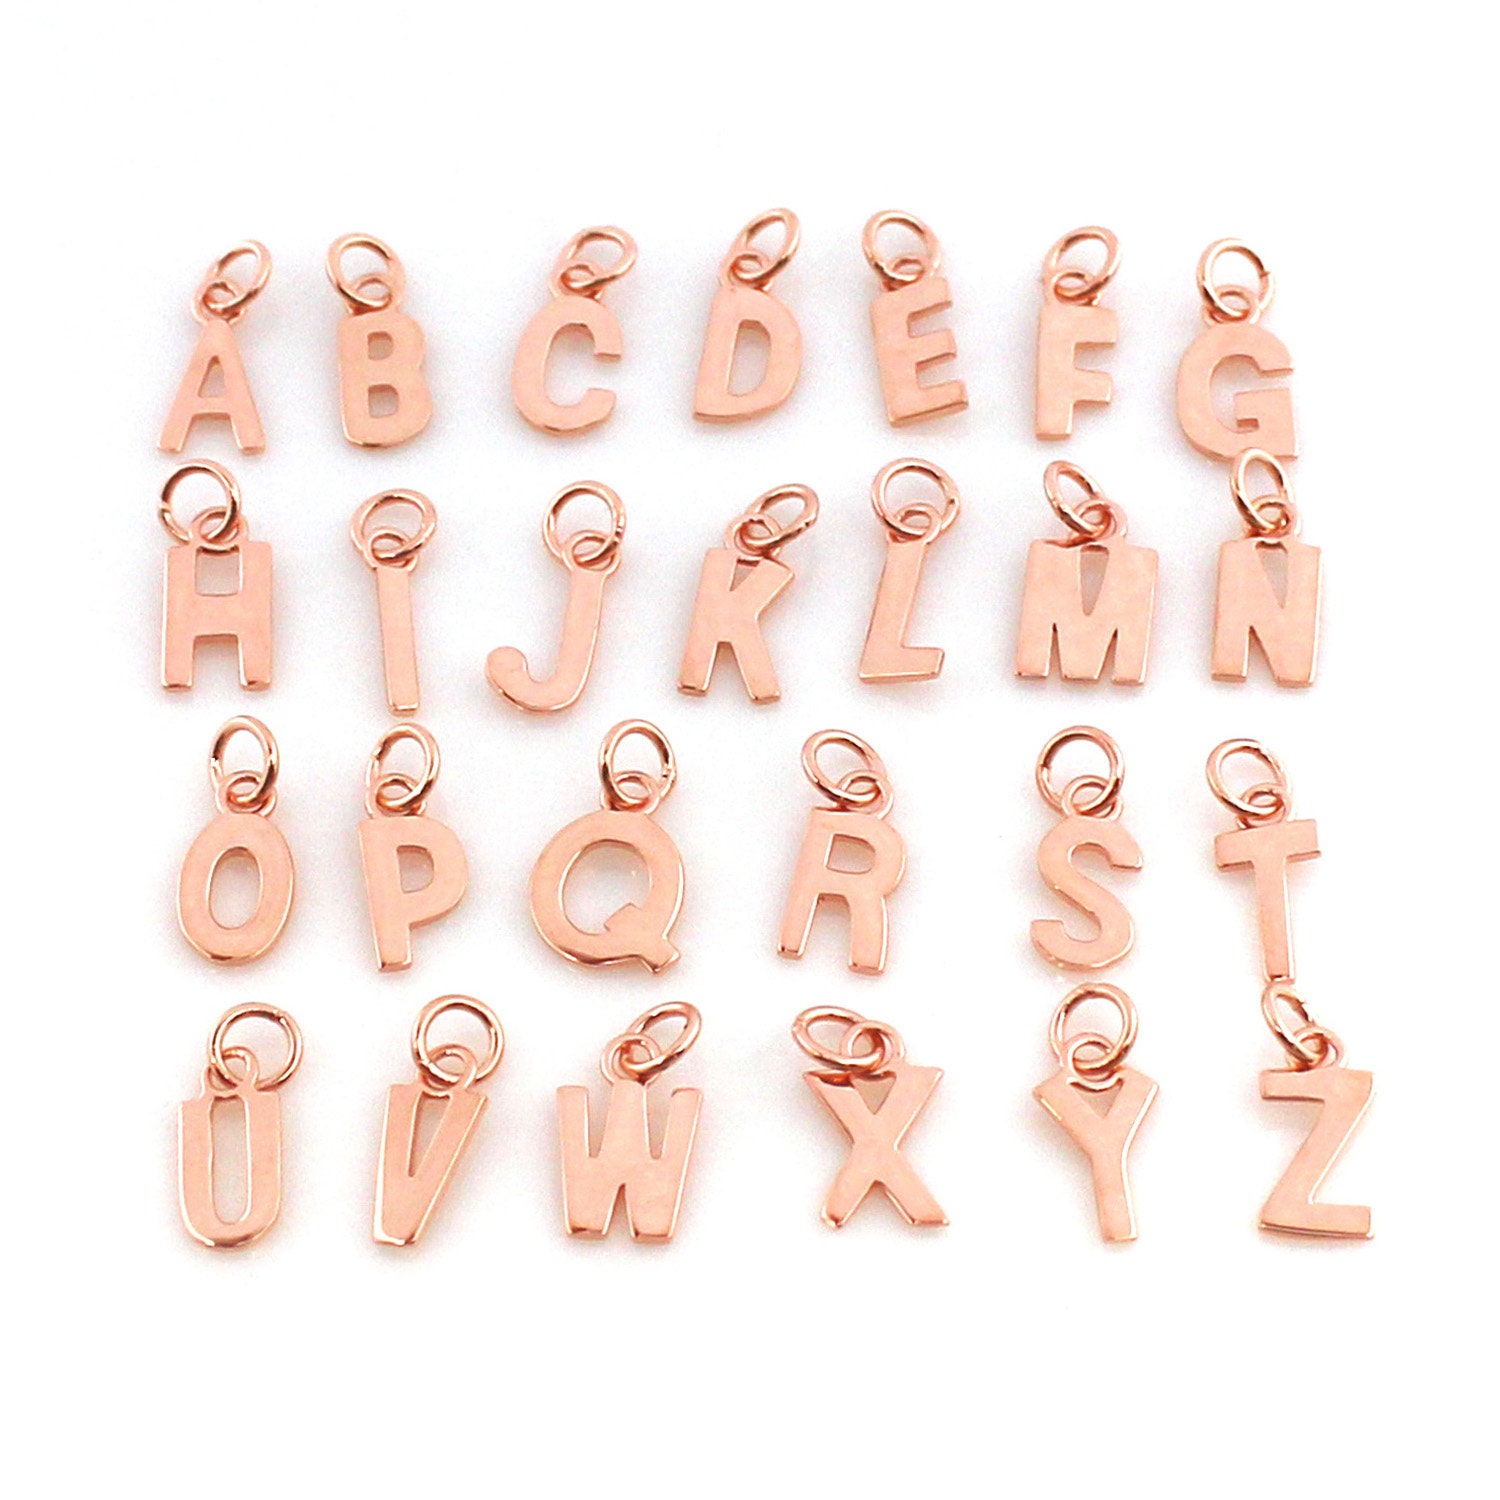 Double Sided Gold Enamel Letter Charms - 1pc, Assorted Colors, Letter Charms Near Me, Letter Charms for Necklaces, Letter Charms Wholesale